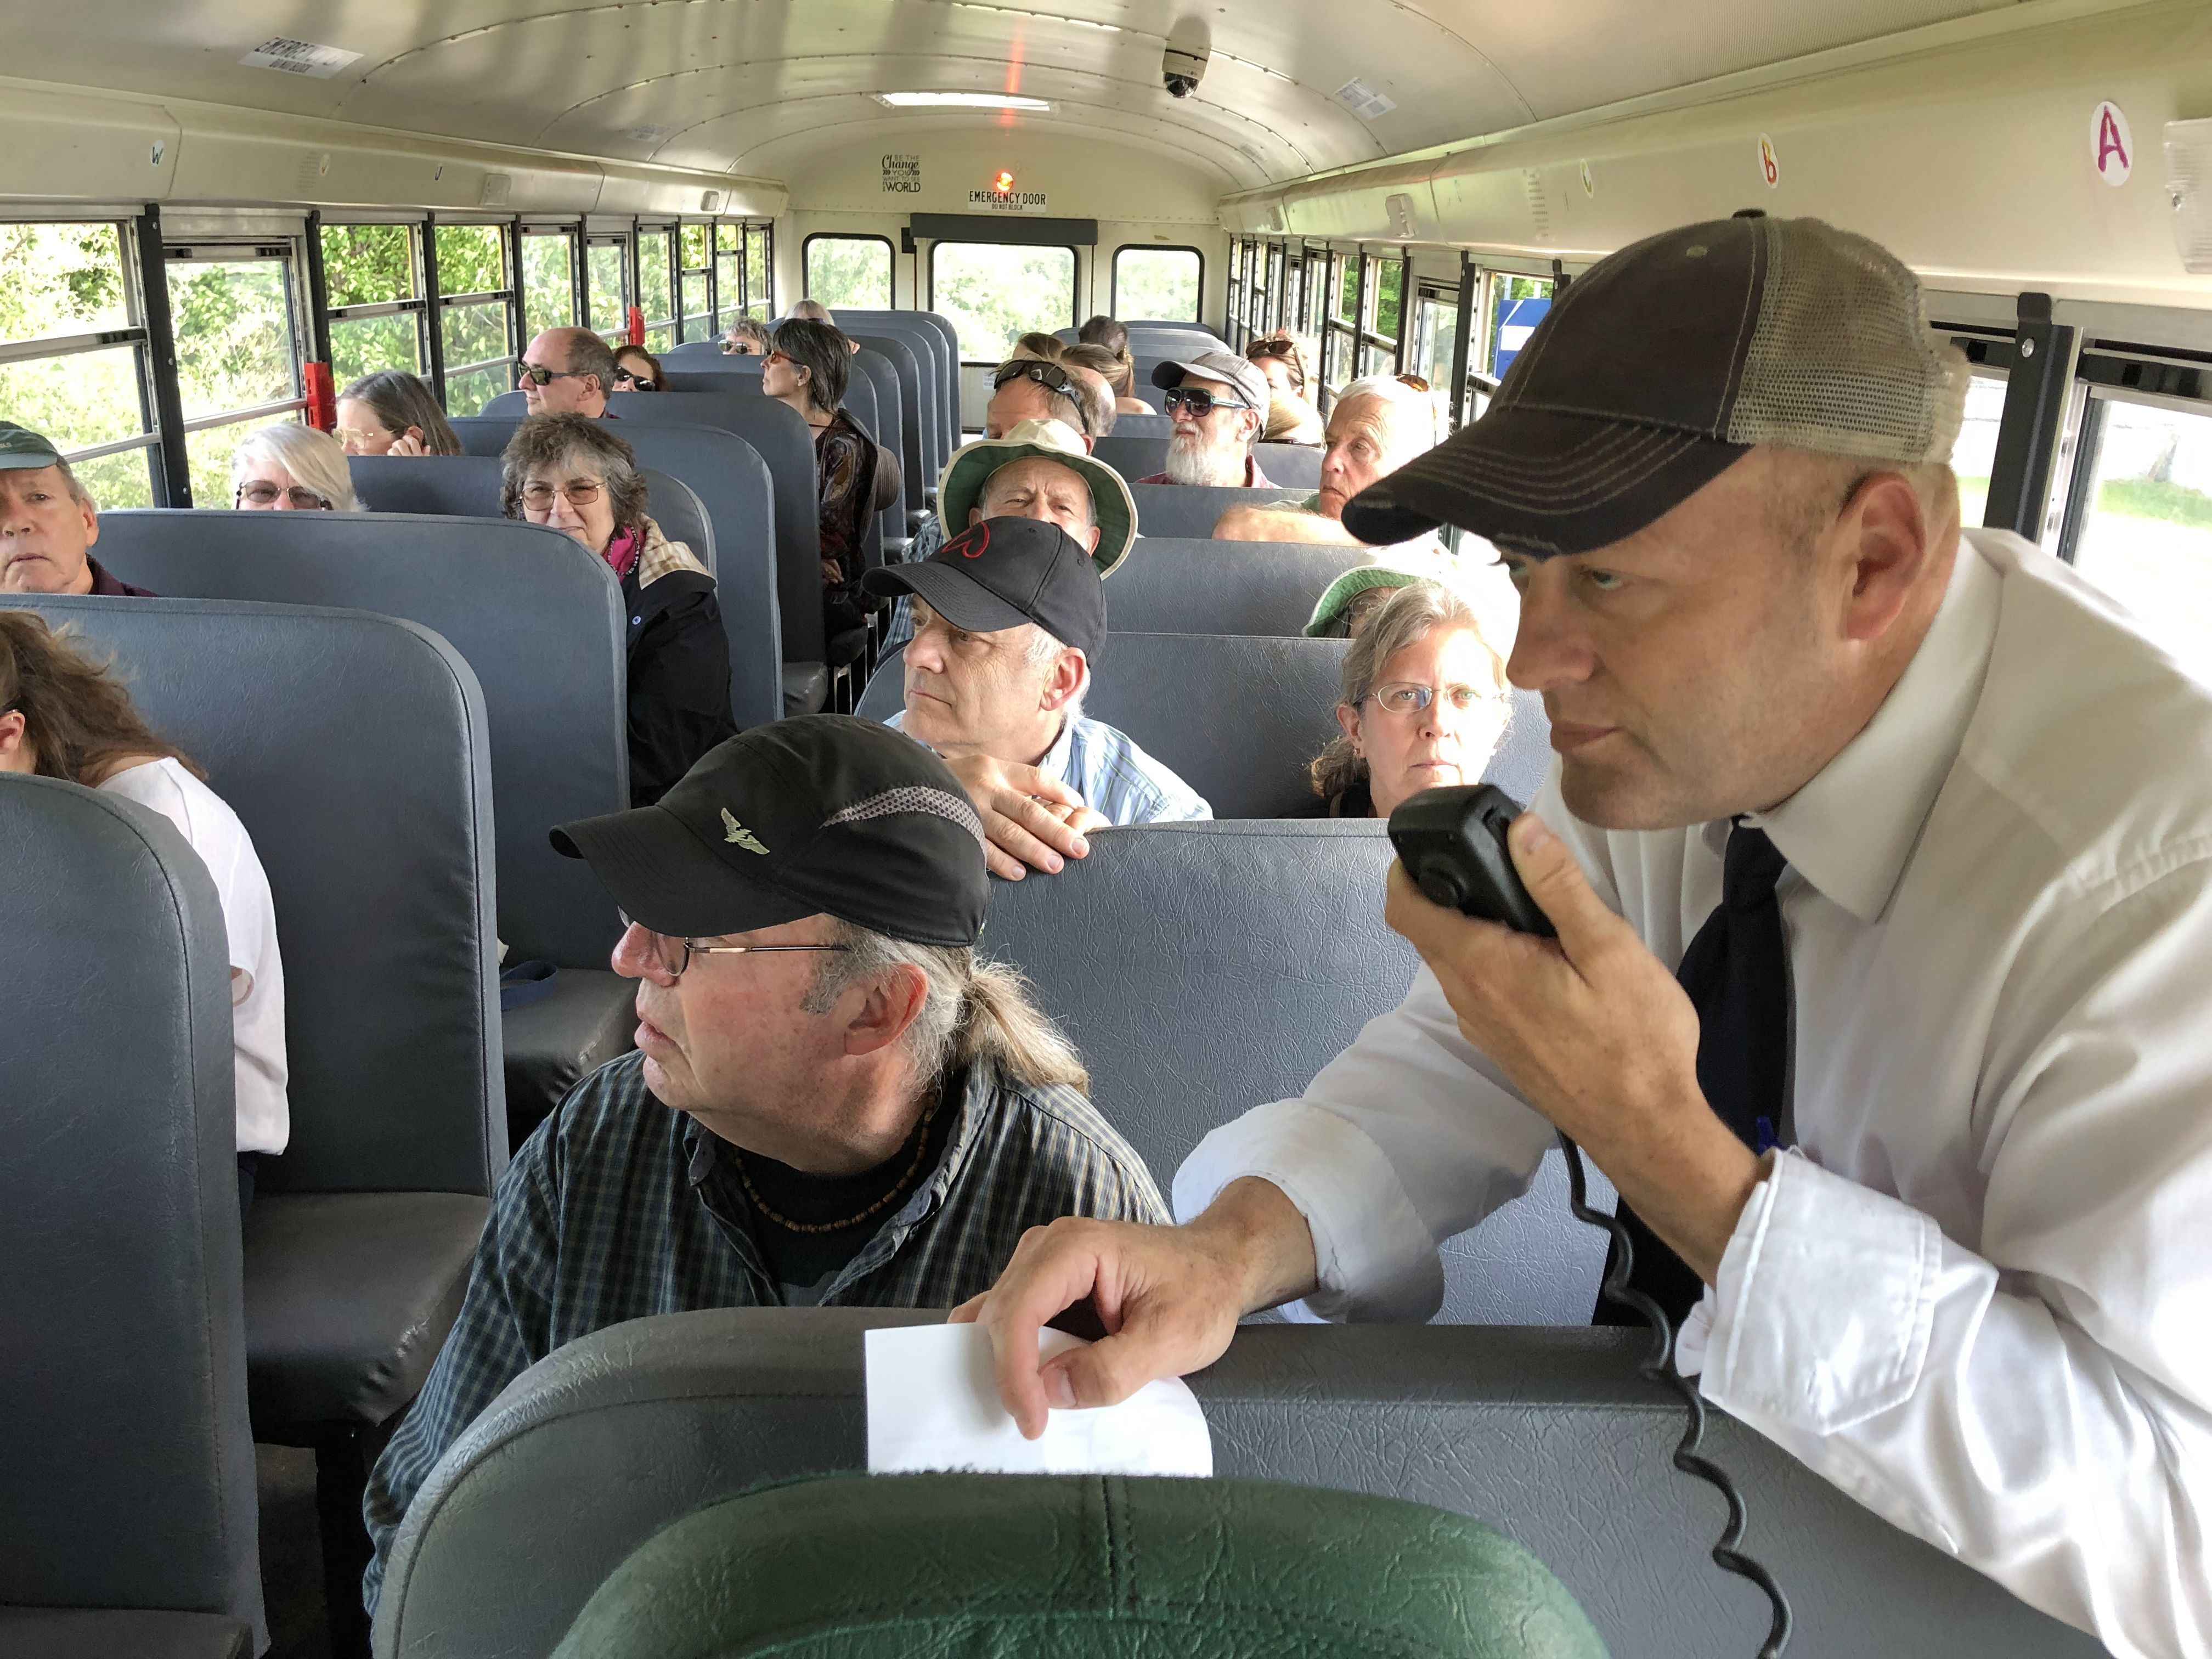 North Smithfield Town Planner Tom Kravitz speaking to the solar-siting bus tour participants.